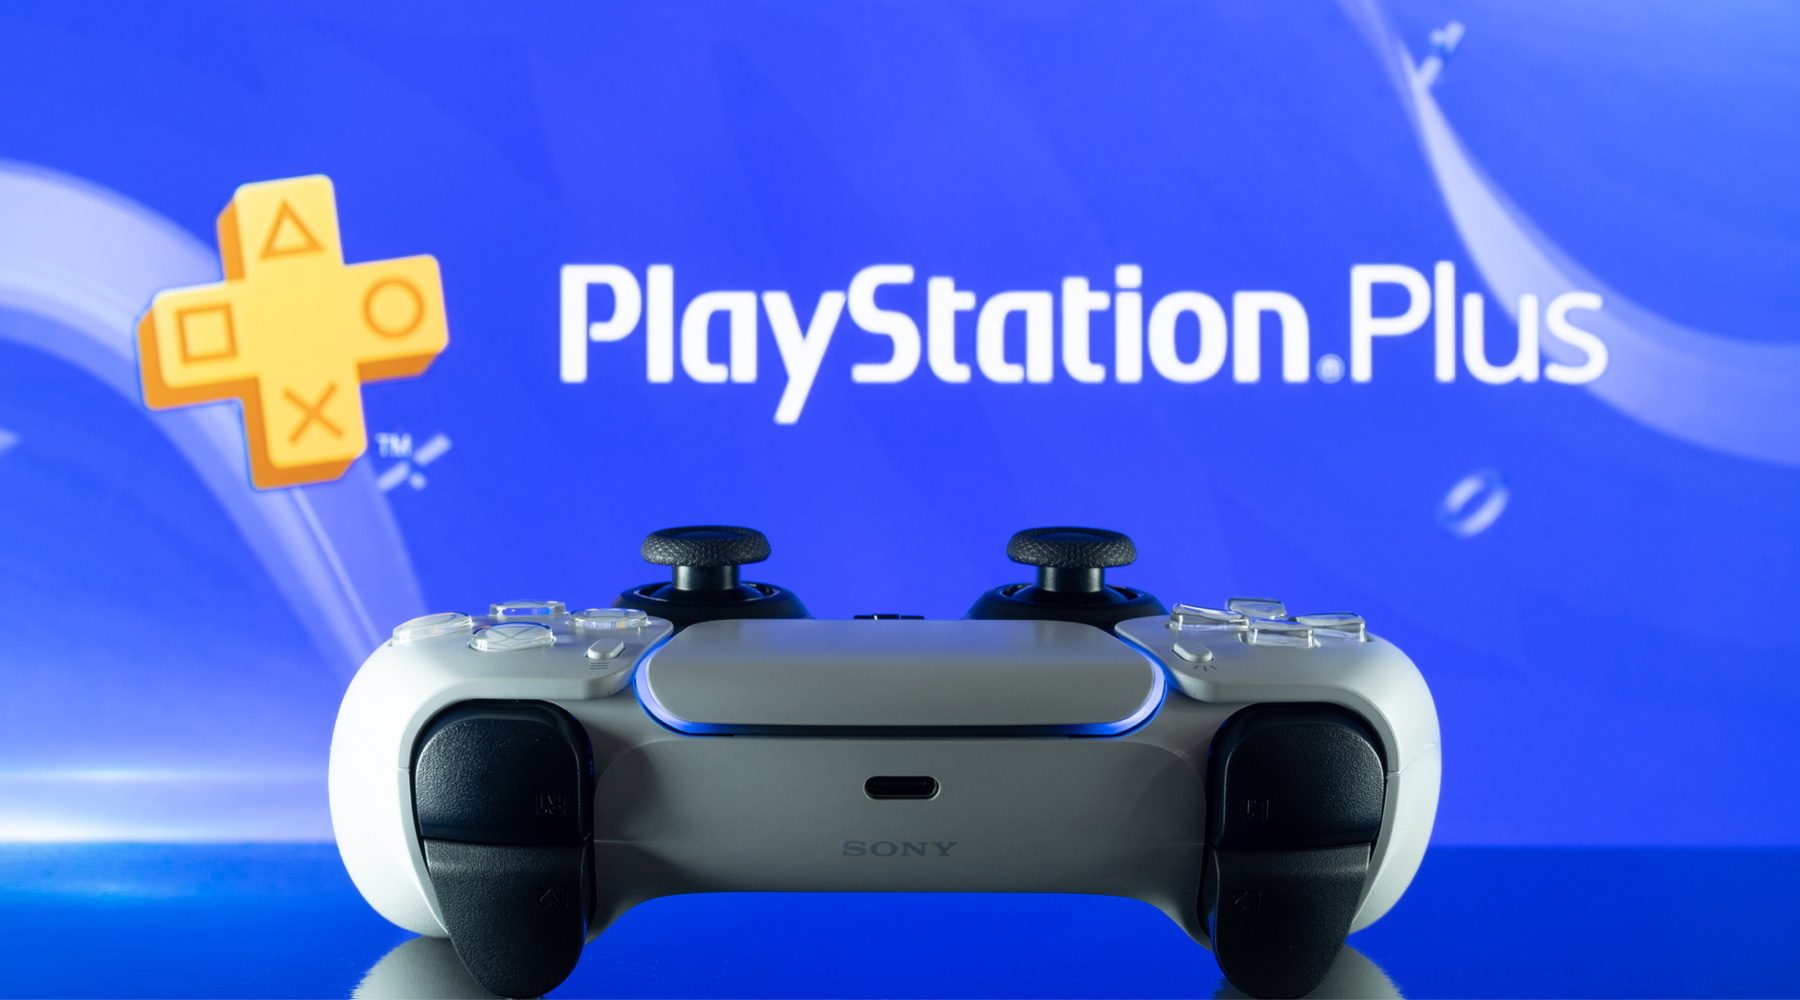 PlayStation Plus has lost nearly 2 million subscribers since its